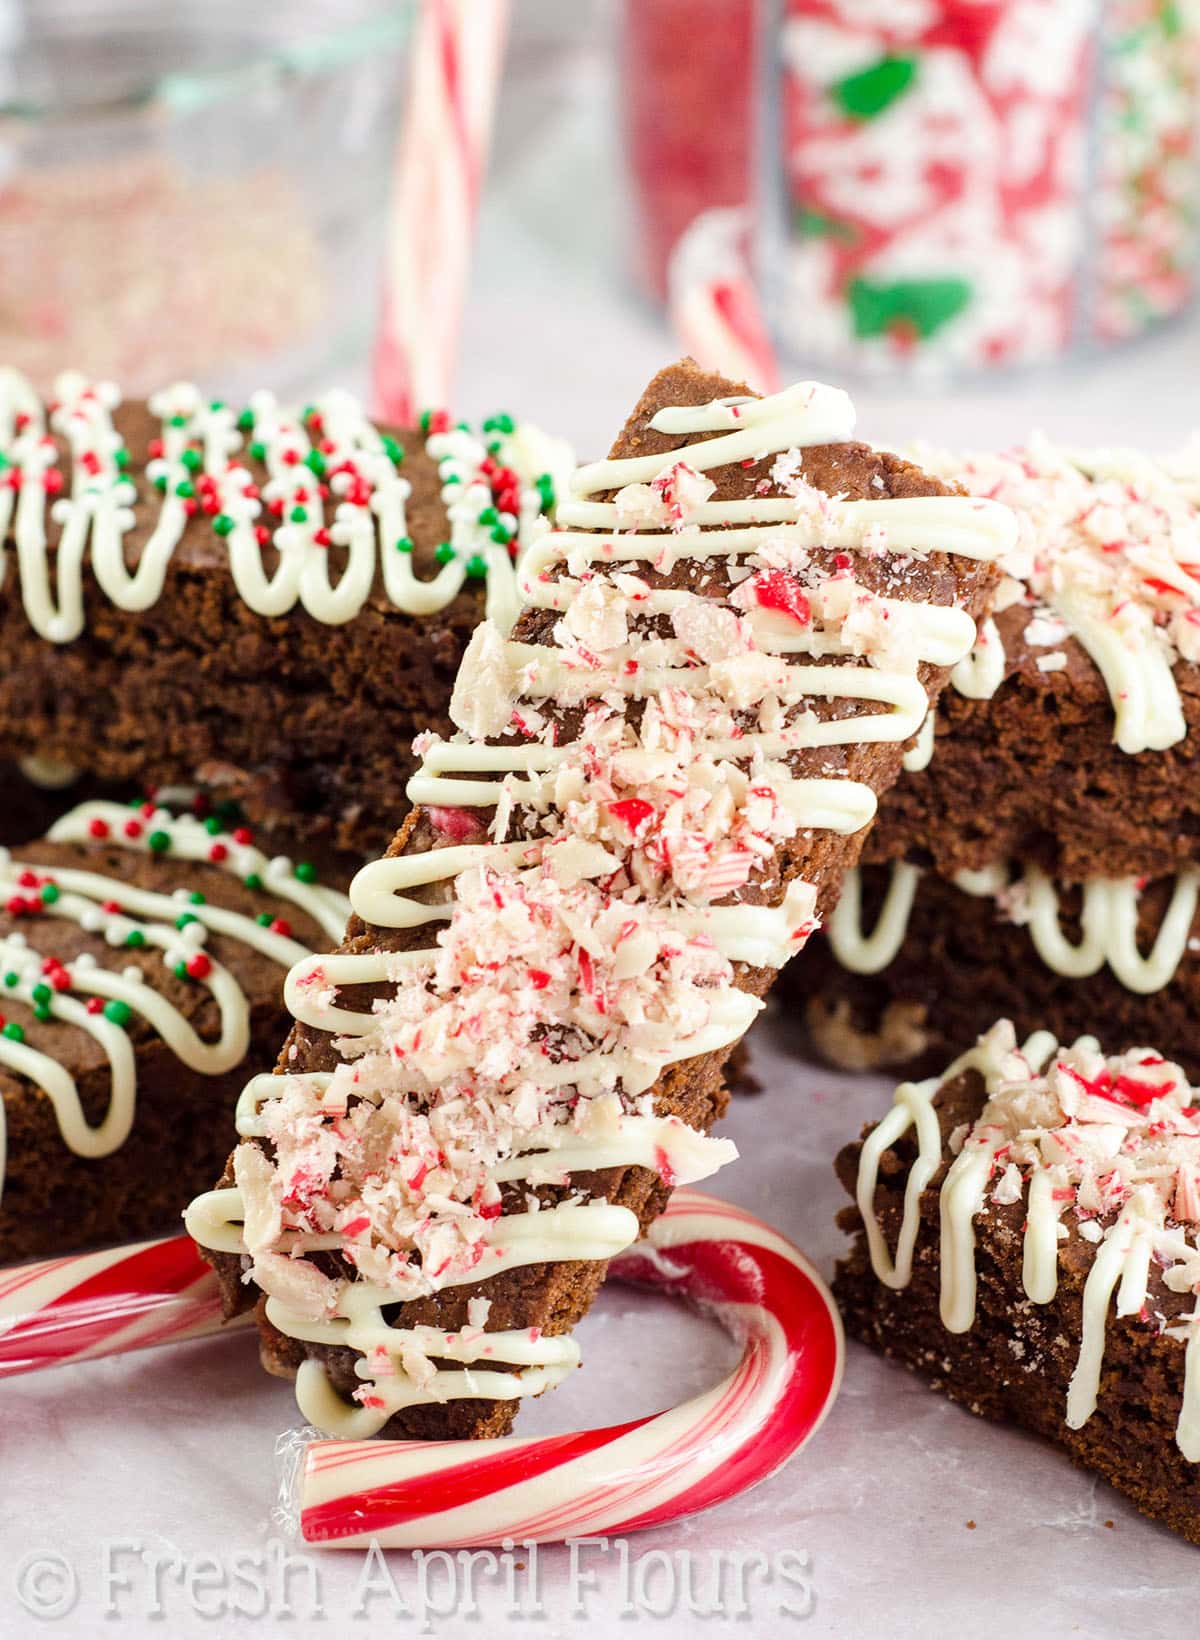 Chocolate peppermint biscotti leaning on a stack of more peppermint biscotti.